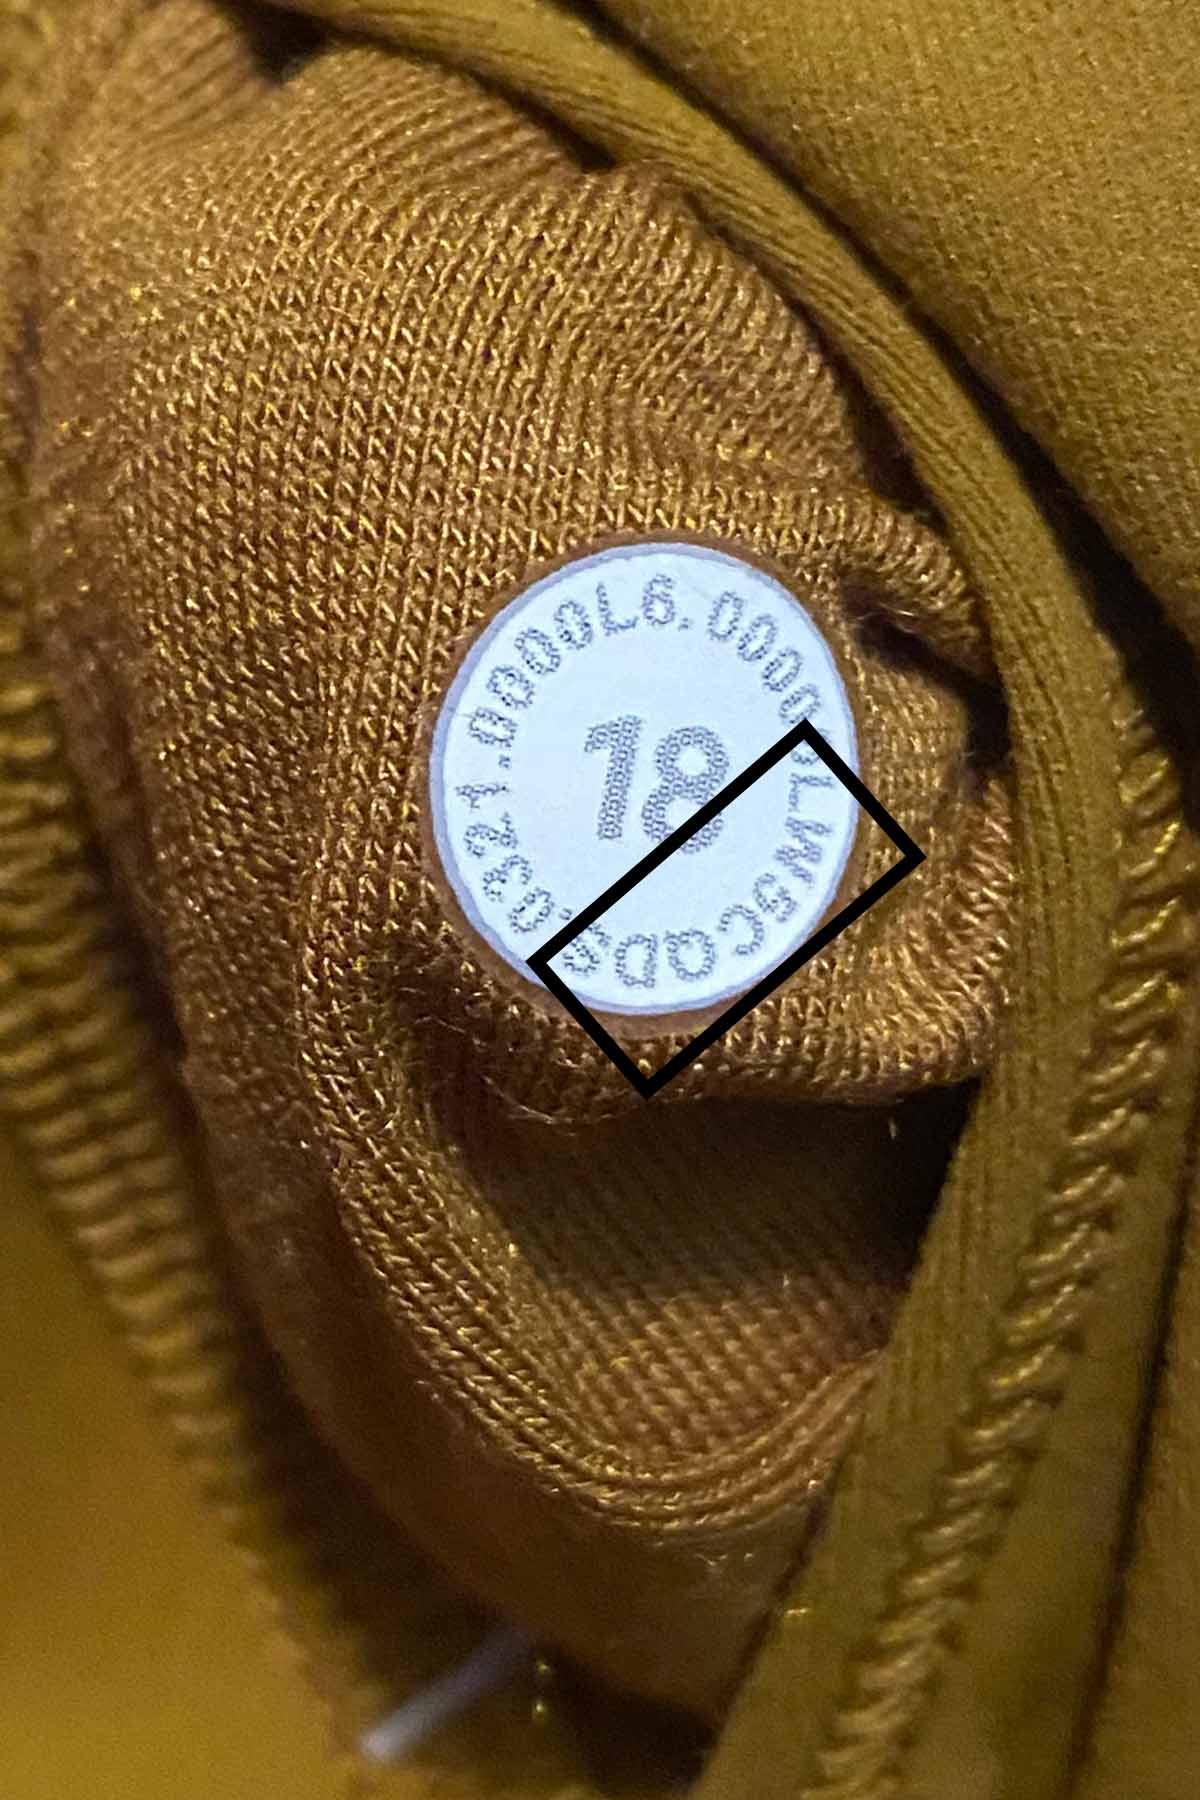 up close picture of a lululemon size dot with the style number outlined in a black box.